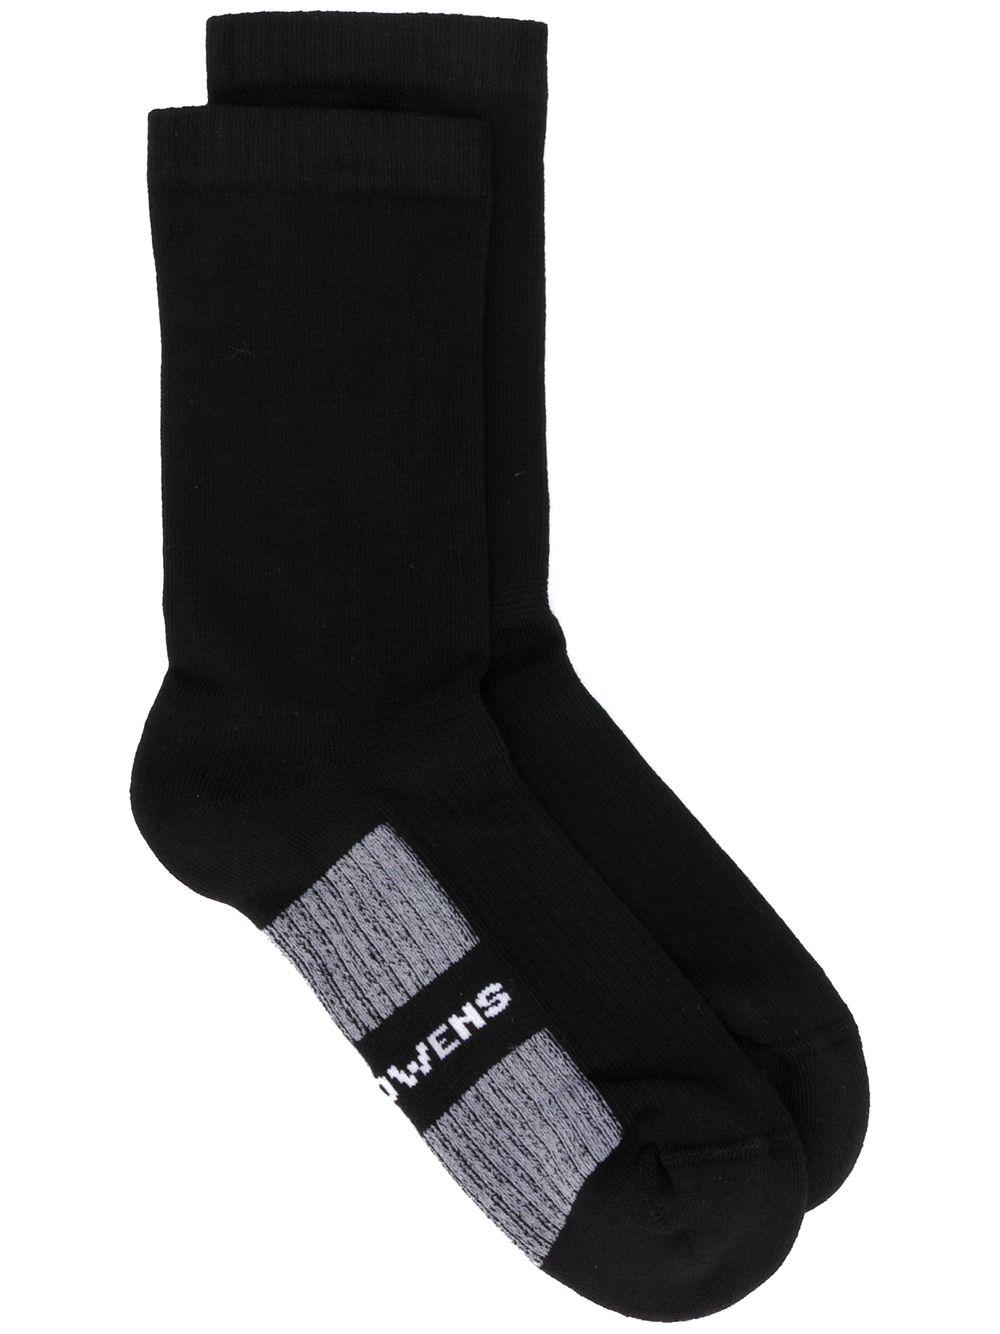 Rick Owens Cotton Logo Embroidered Socks in Black for Men - Lyst